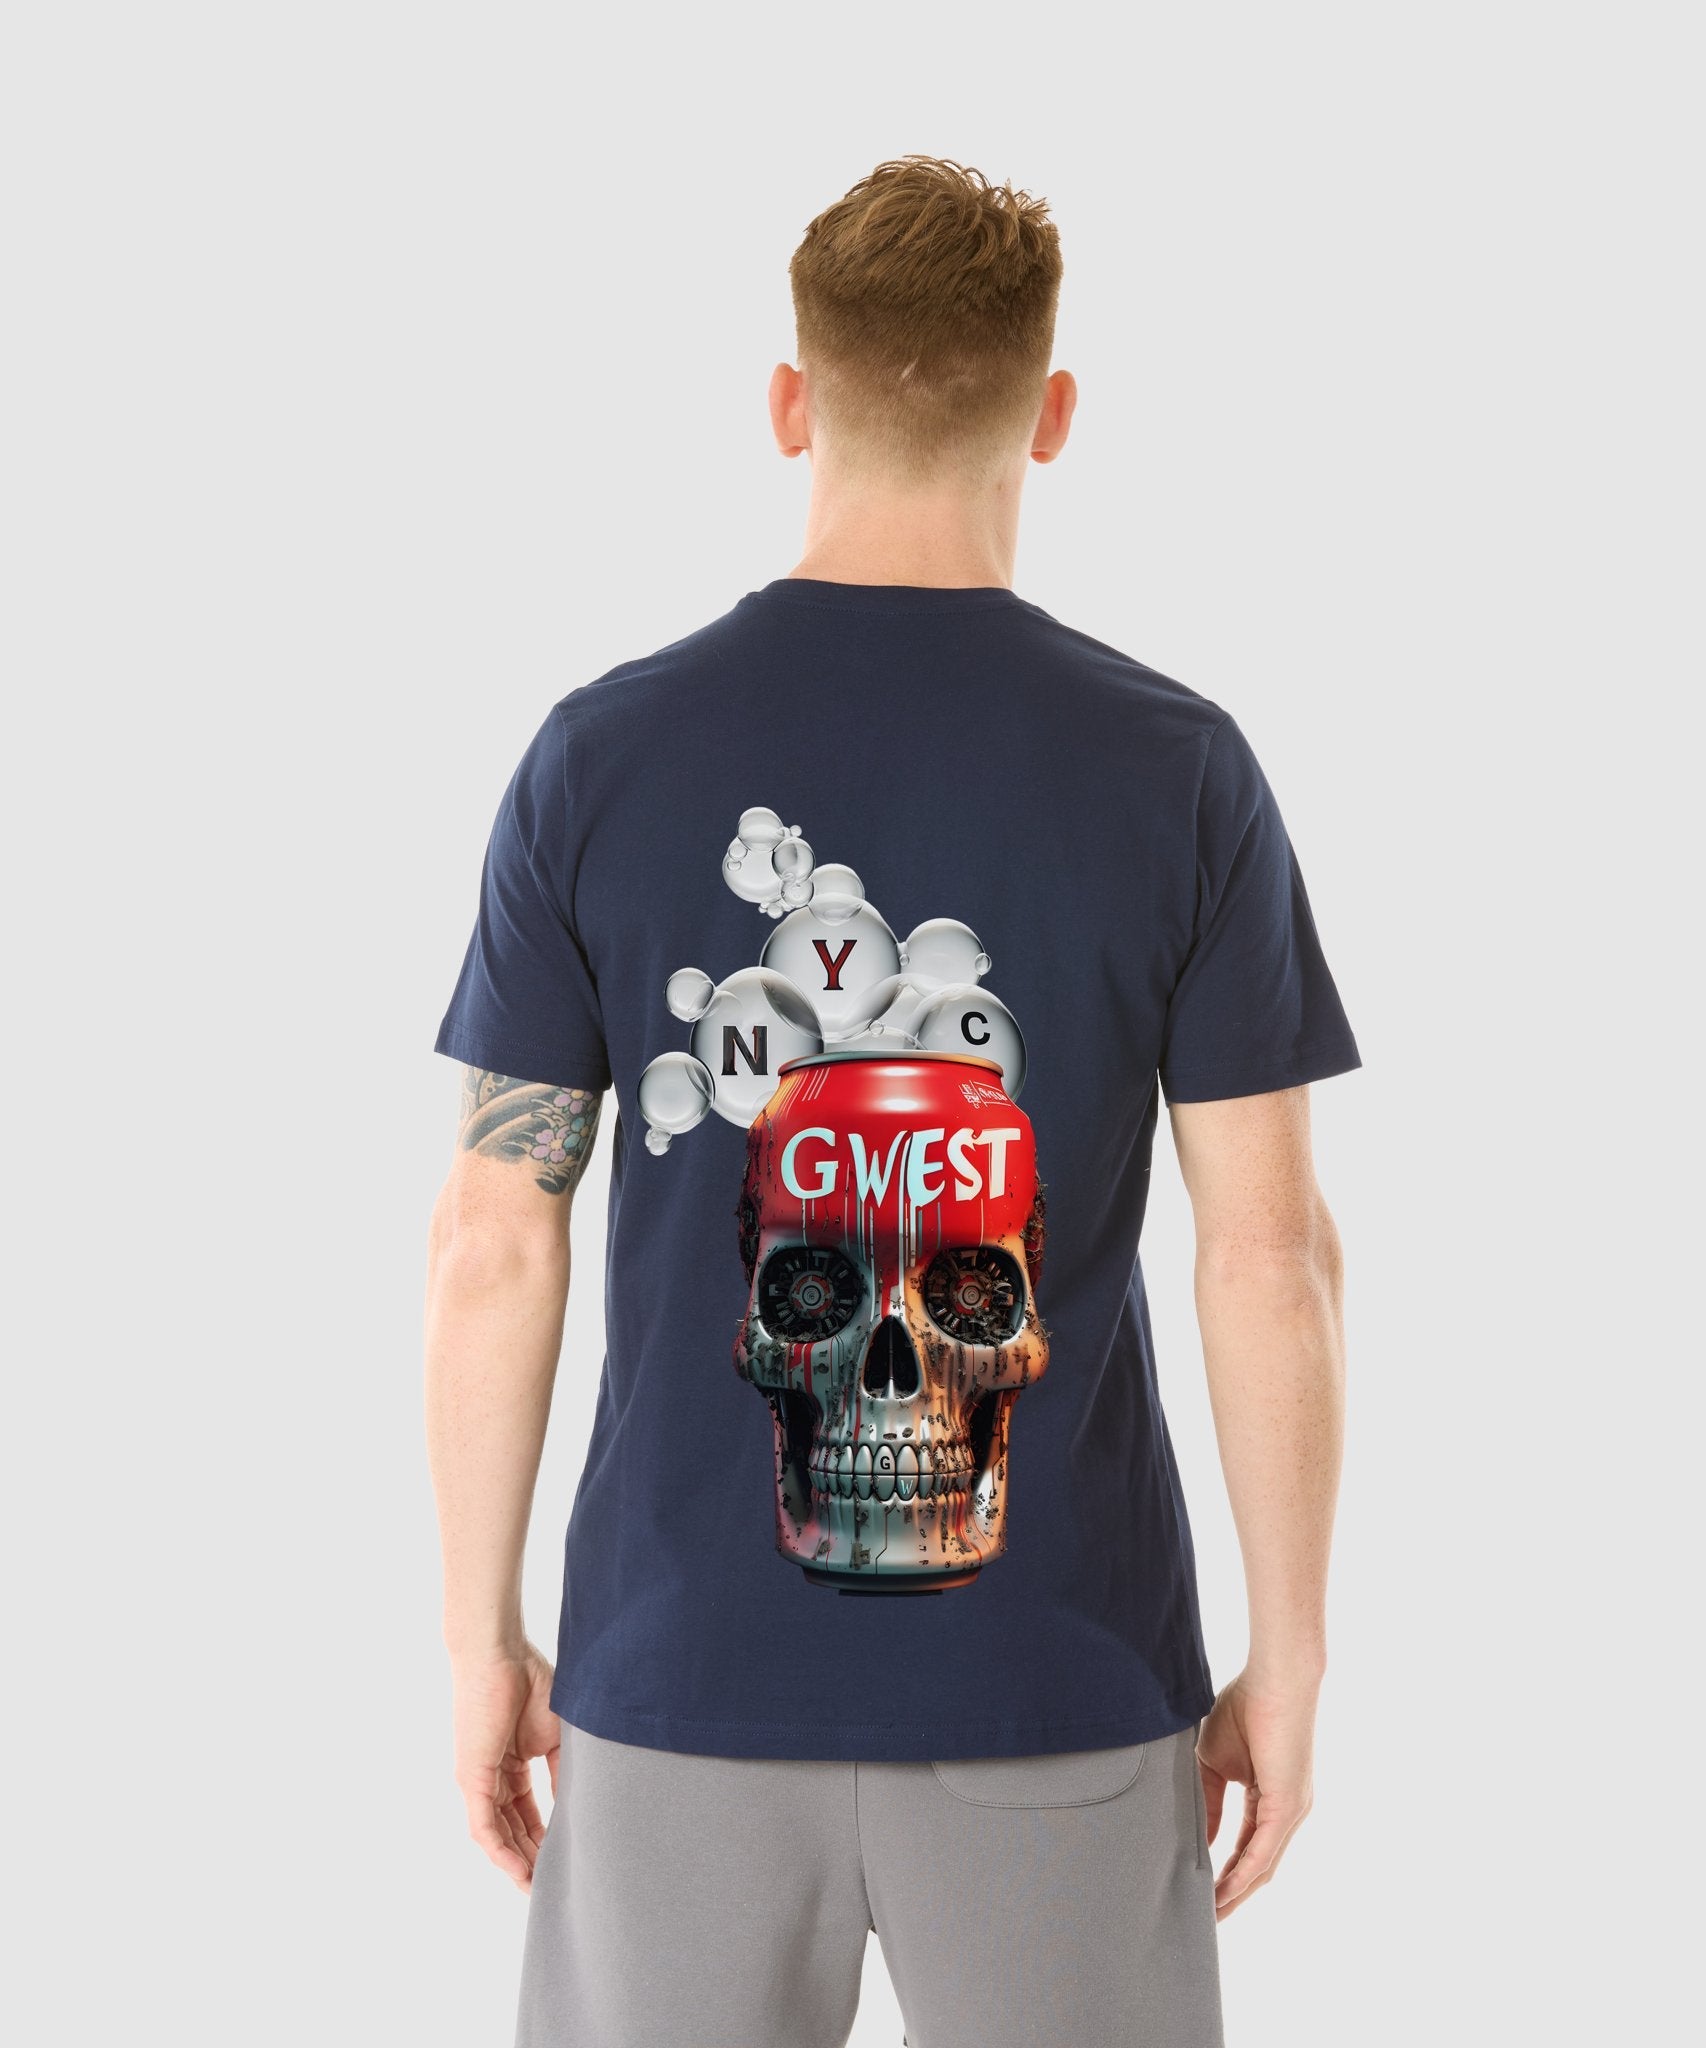 G WEST NYC COKE CAN T-SHIRT - 3 COLORS - G West